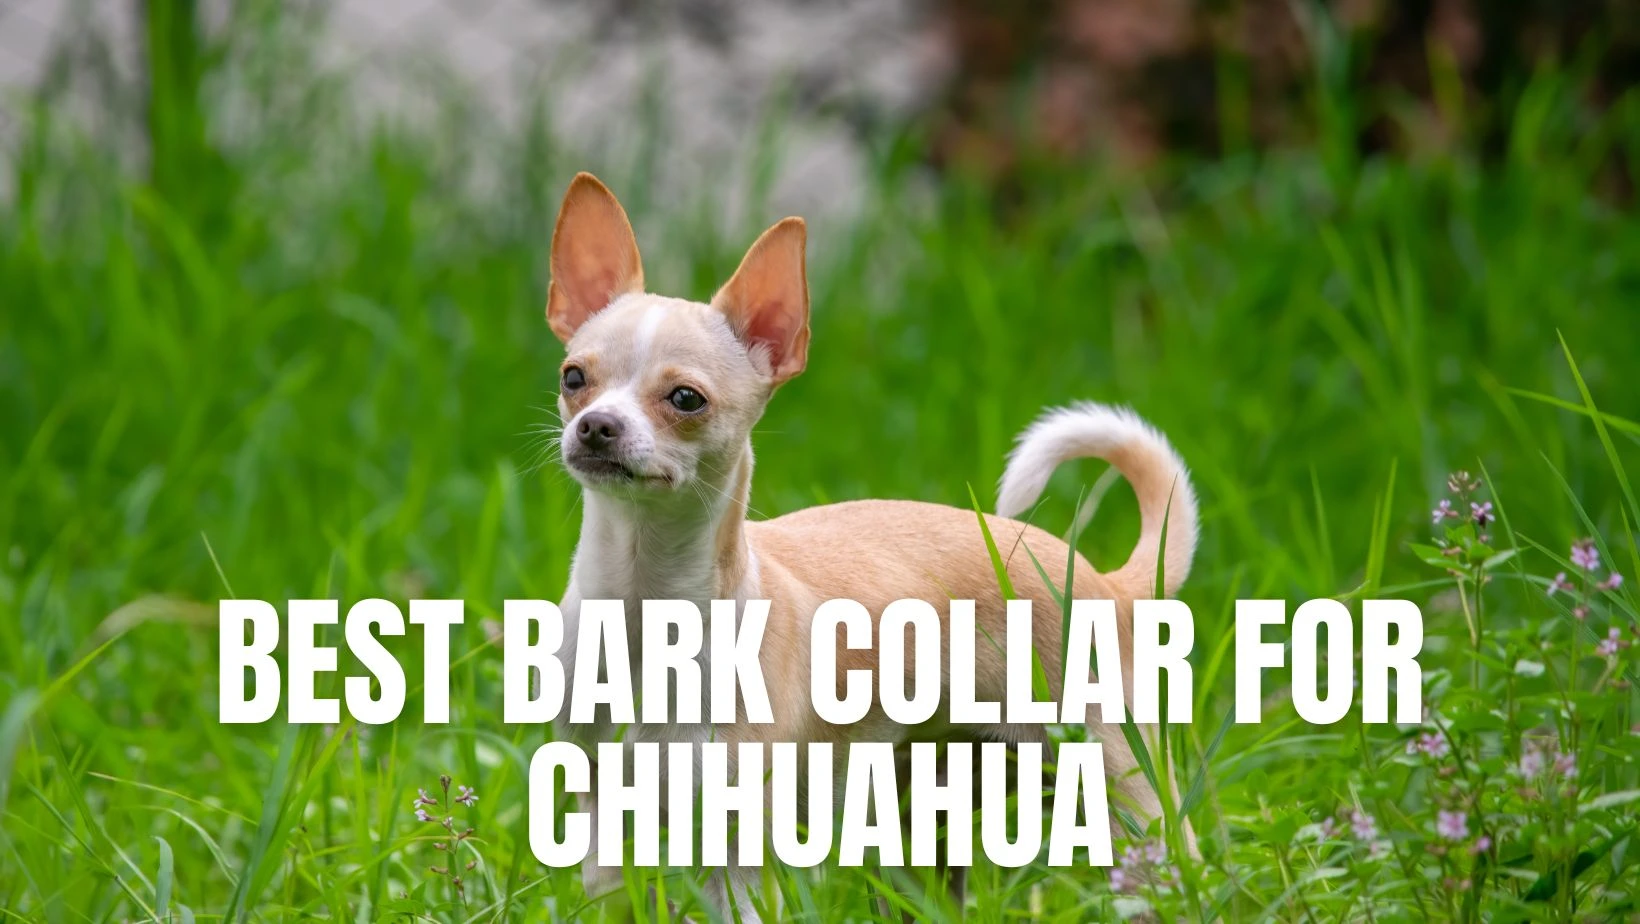 Best bark collar for chihuahua